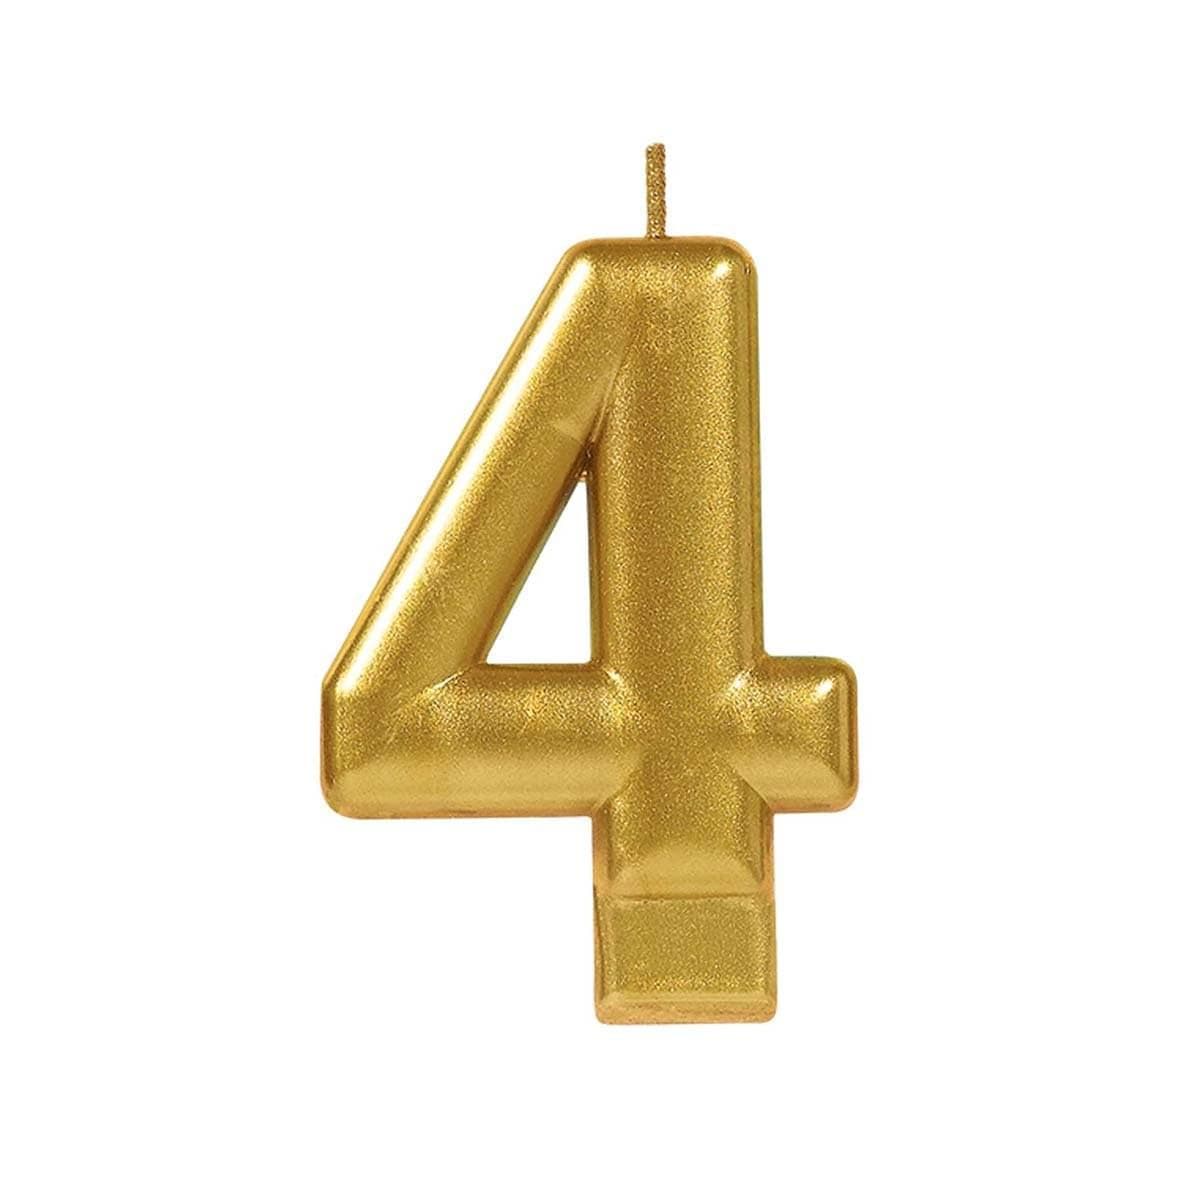 Buy Cake Supplies Metallic Numeral Candle #4 - Gold sold at Party Expert